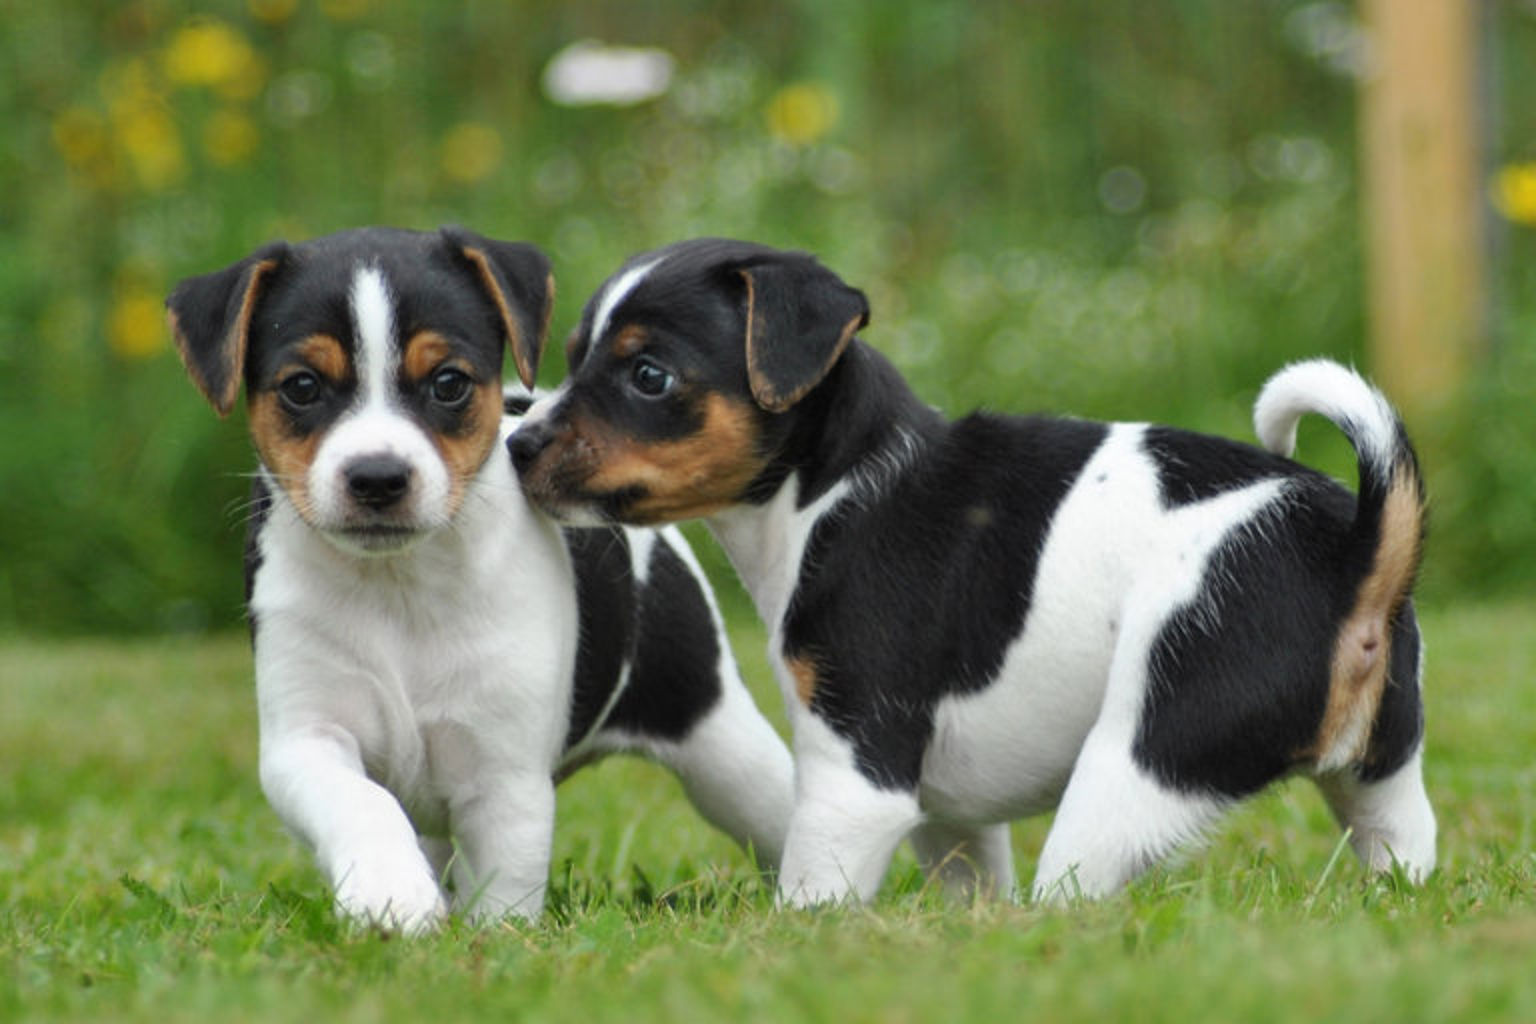 Two danish swedish farm dog puppies outside on the lawn